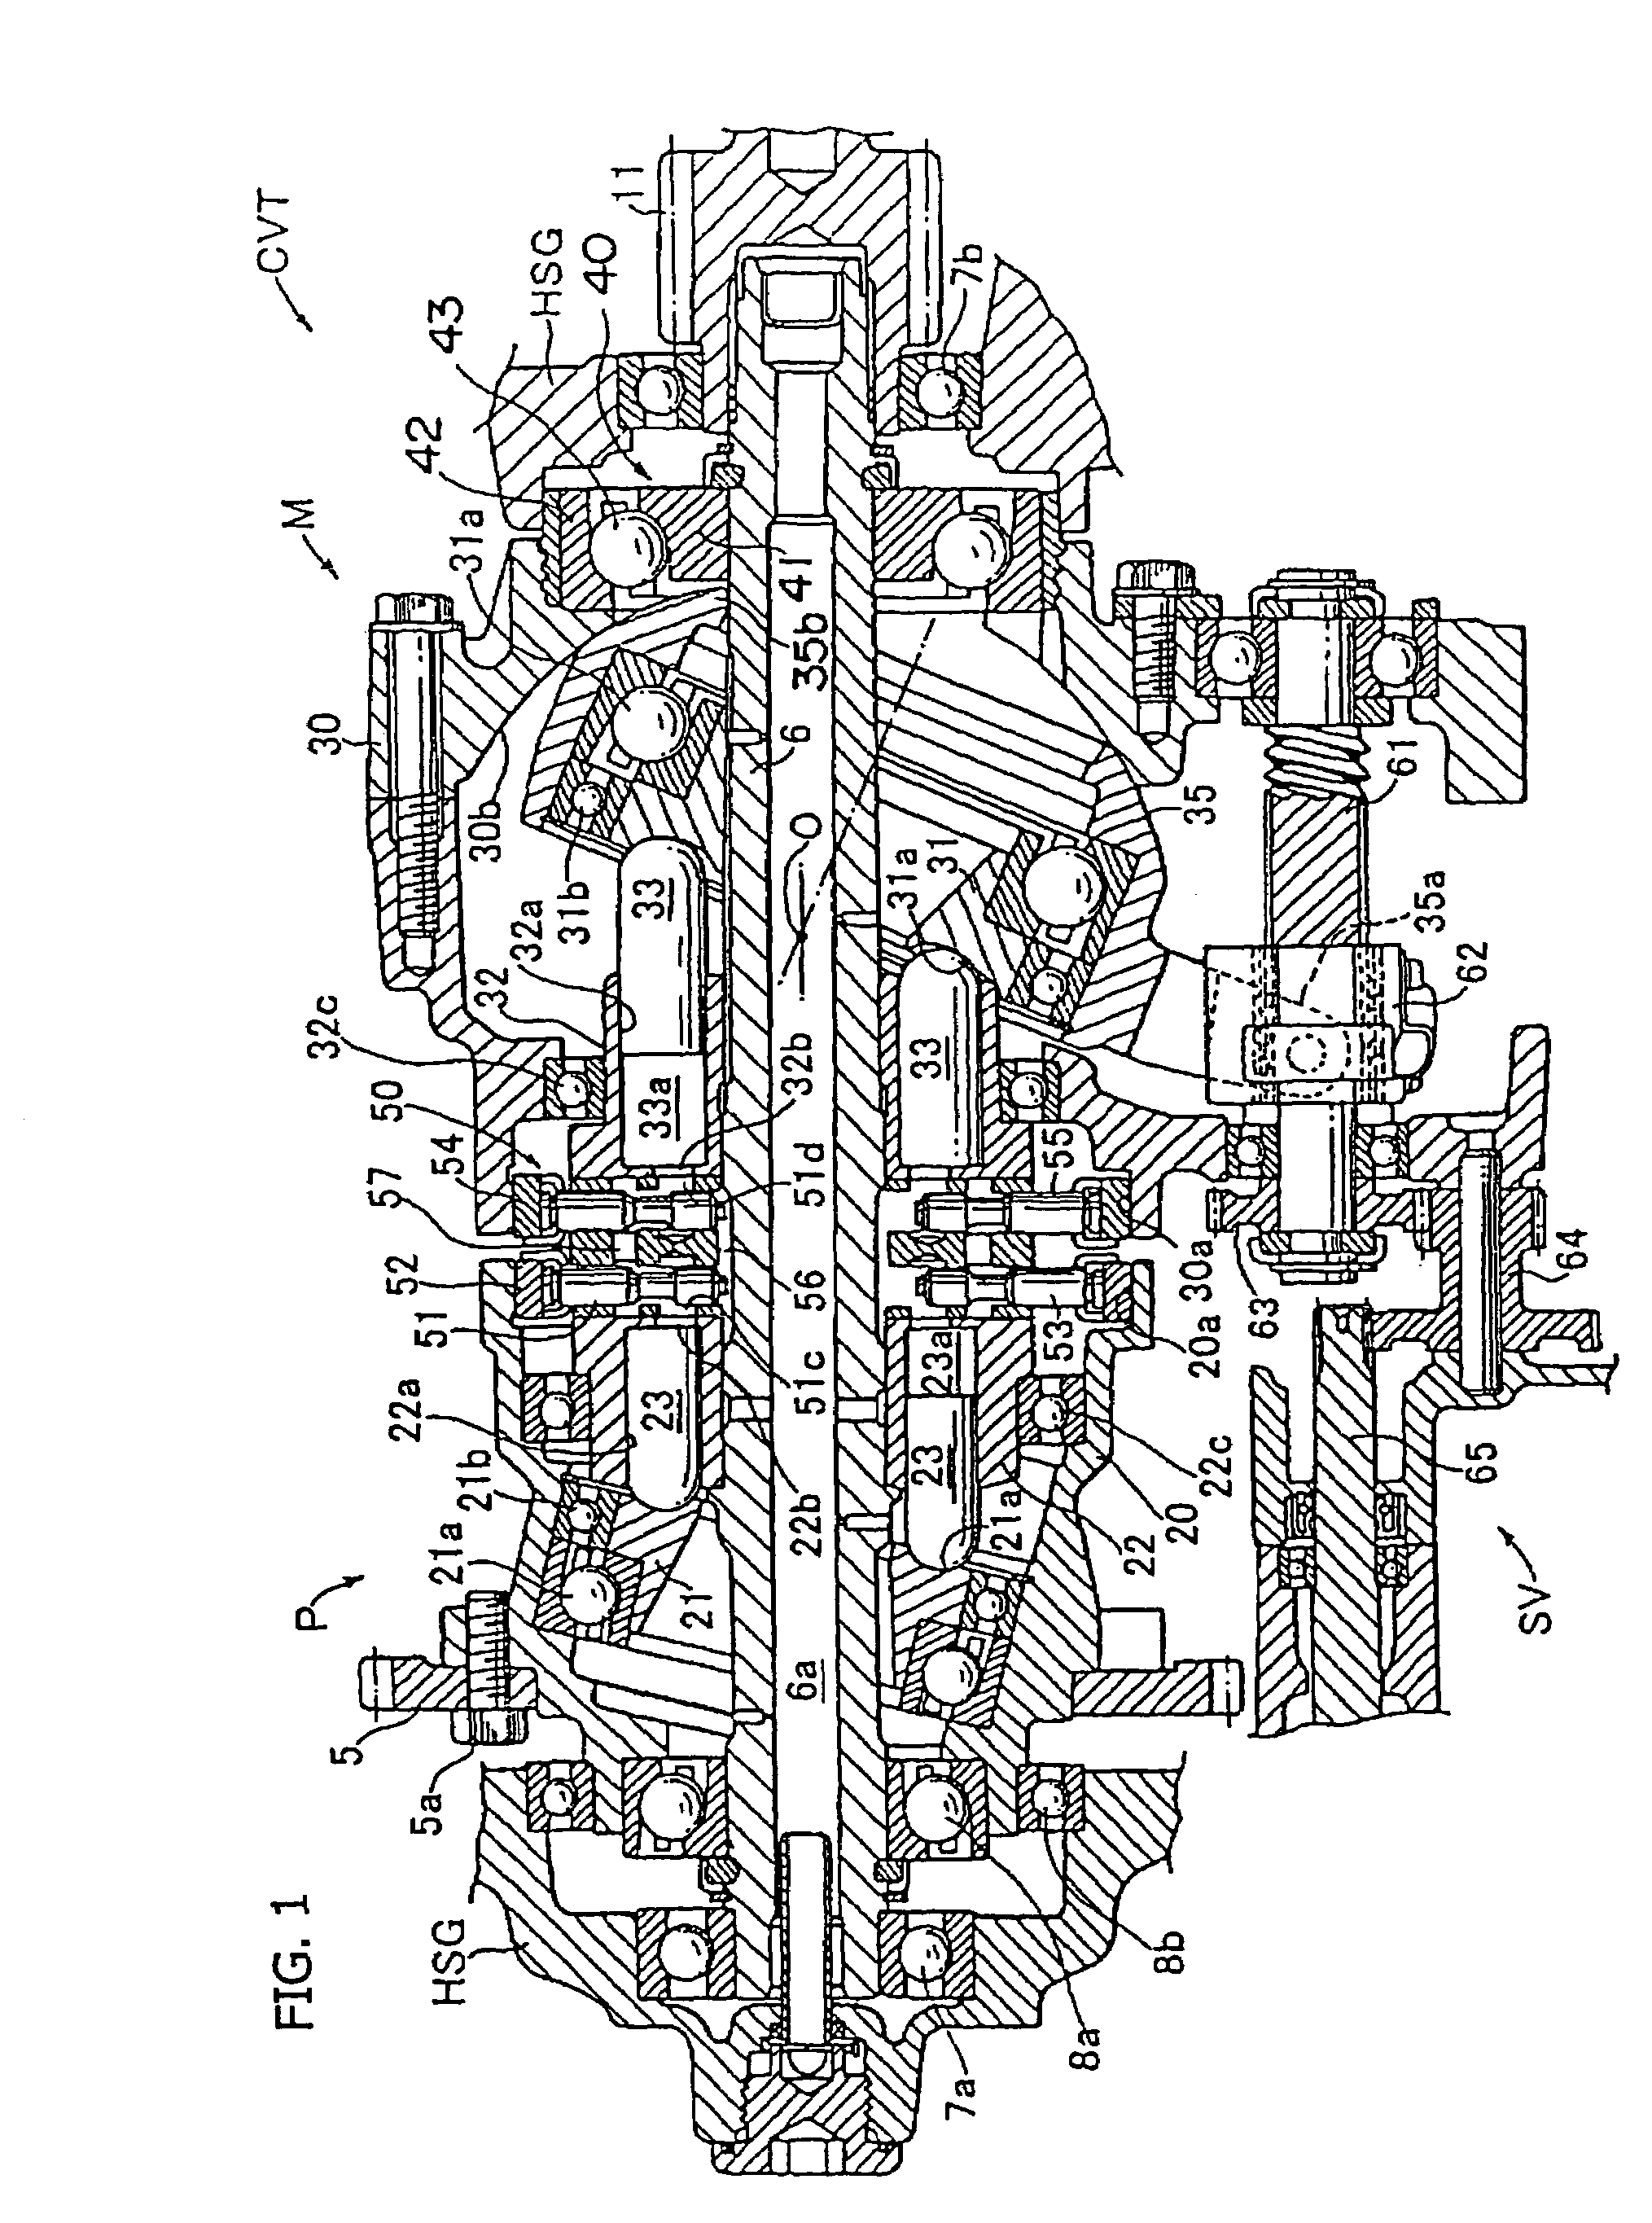 Hydraulic continuously variable transmission